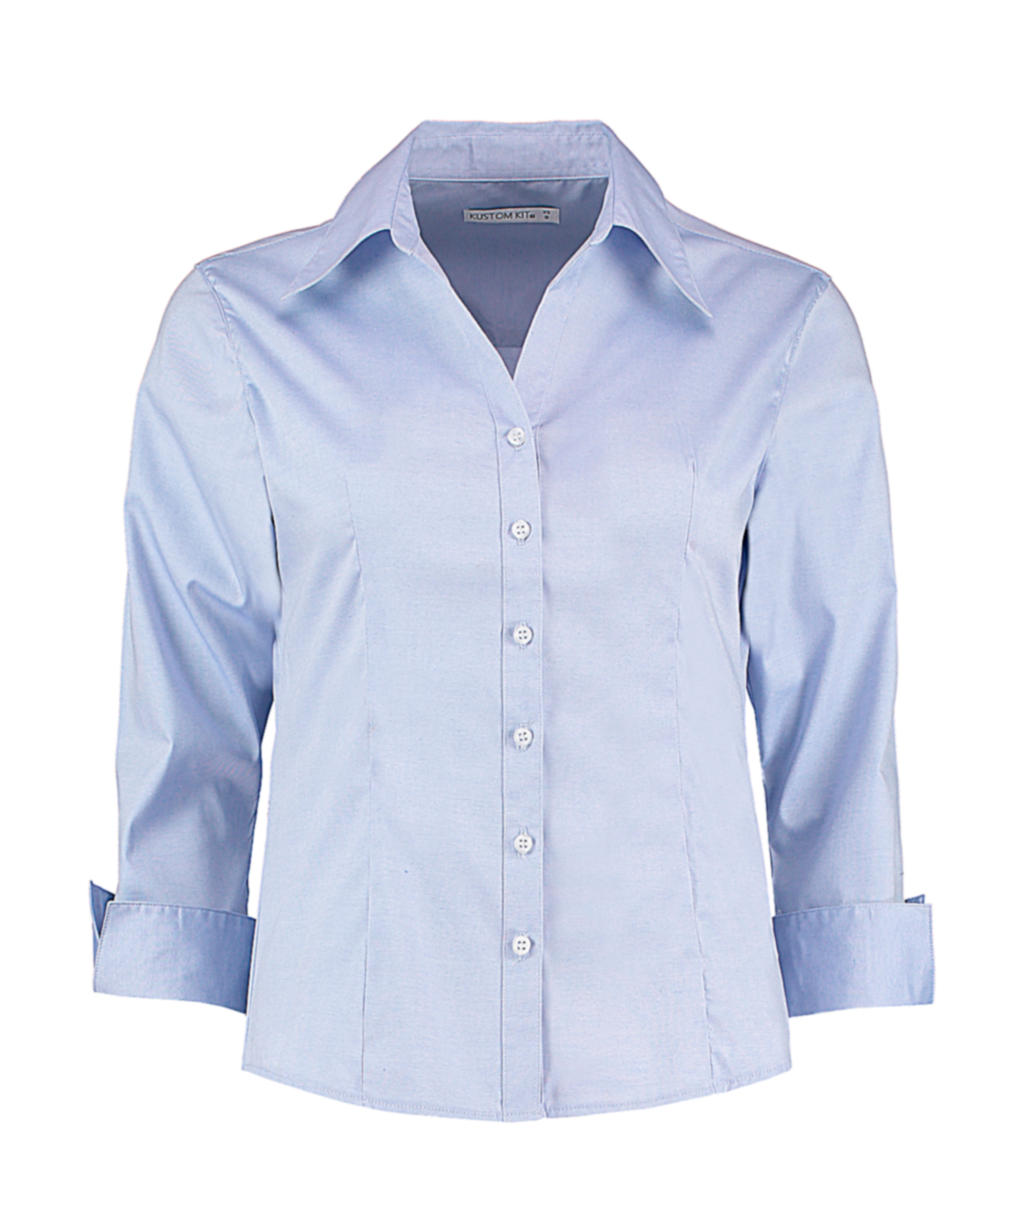  Womens Tailored Fit Premium Oxford 3/4 Shirt in Farbe Light Blue